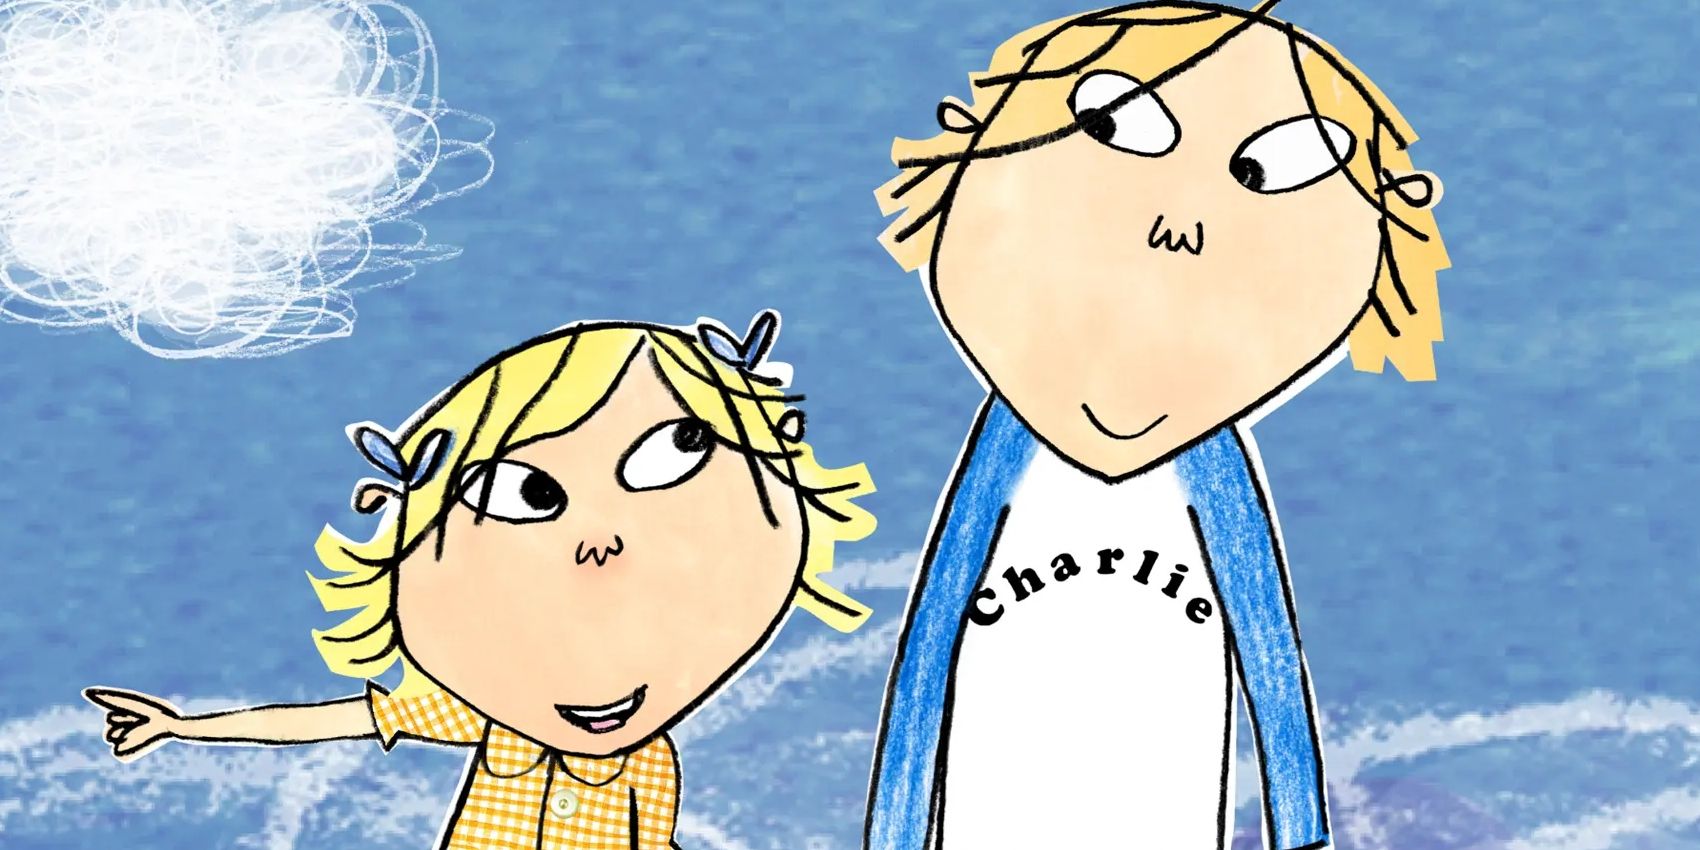 Charlie and Lola standing together in Charlie and Lola